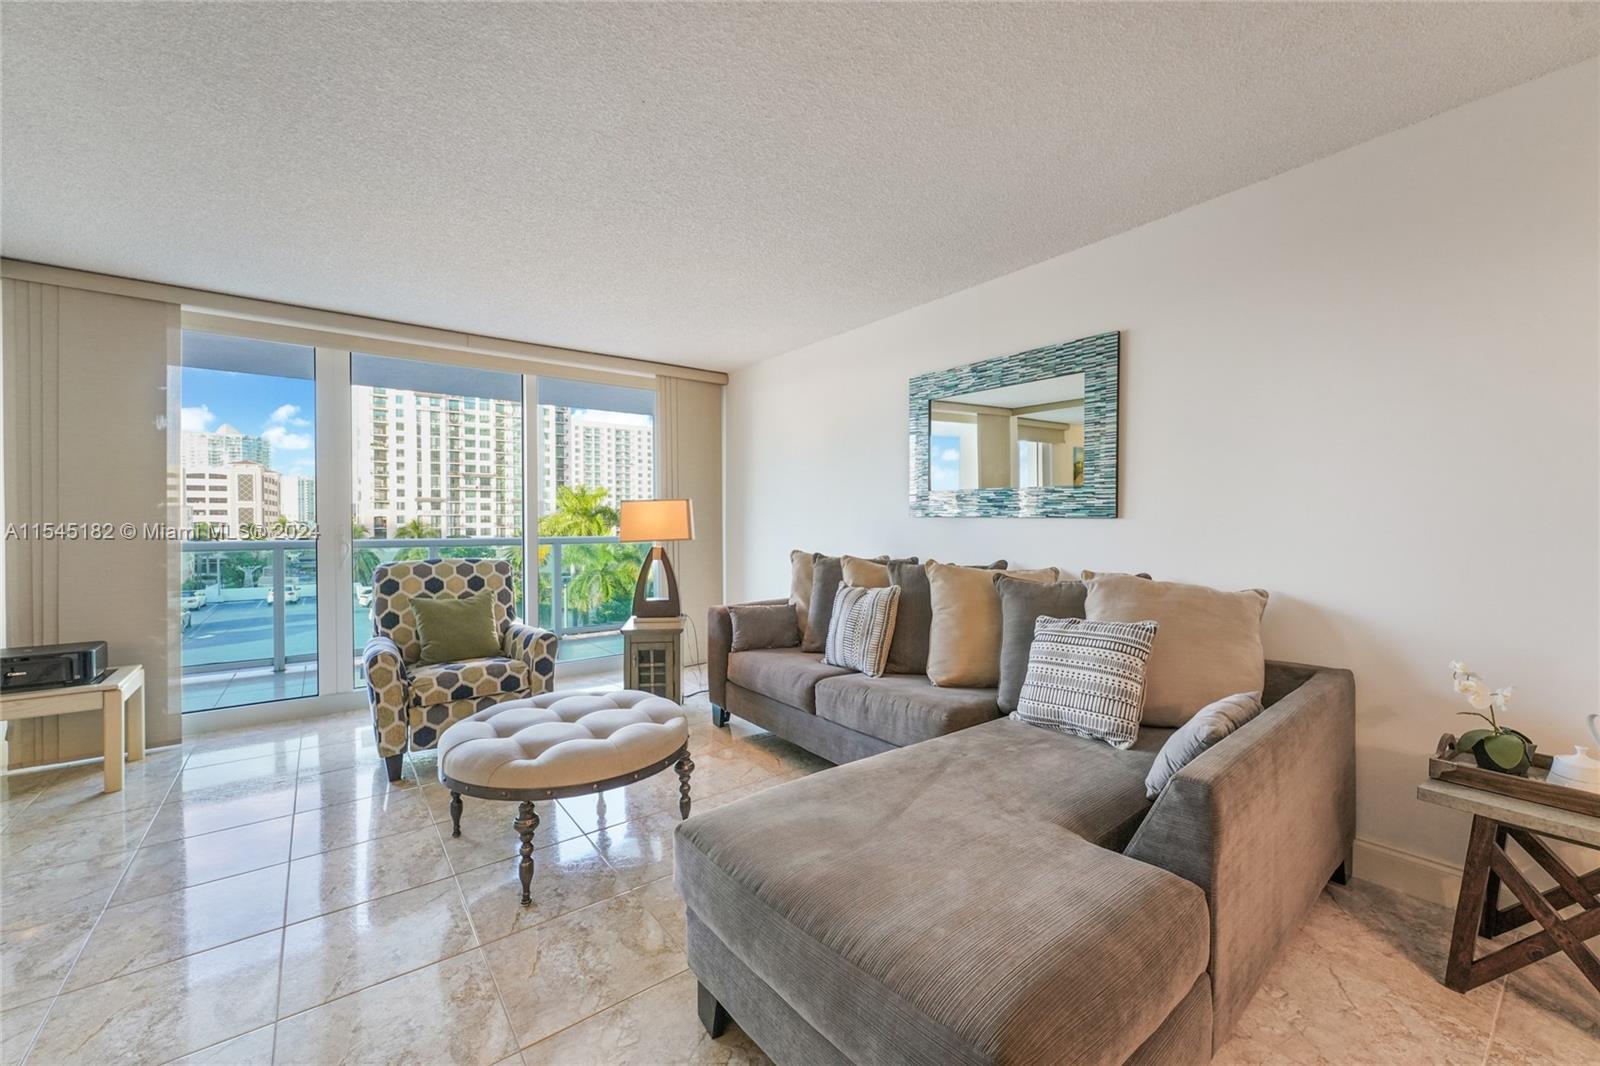 Photo of 100 Bayview Dr #429 in Sunny Isles Beach, FL